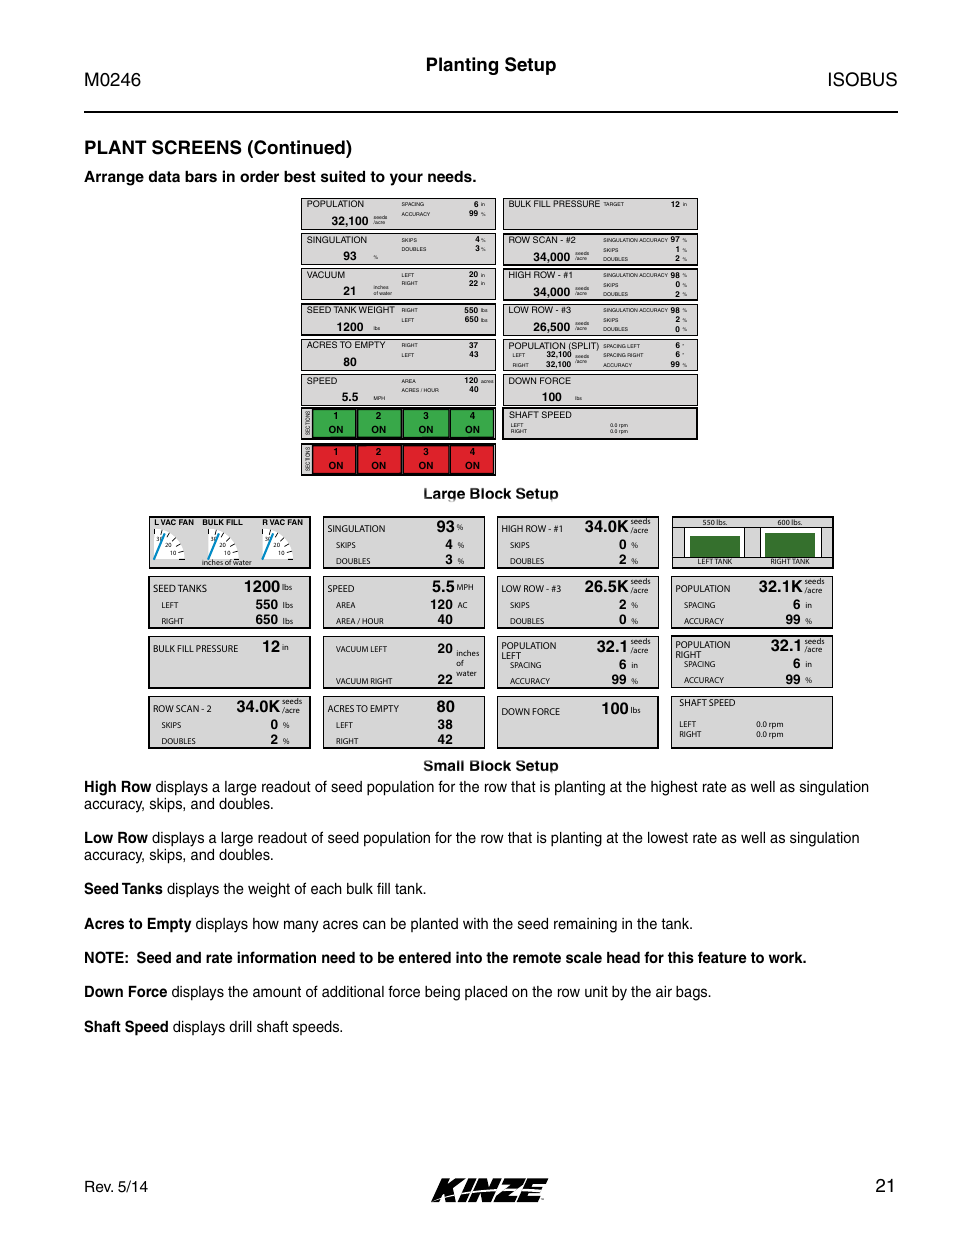 Isobus m0246, Plant screens (continued), Planting setup | Rev. 5/14, Large block setup small block setup | Kinze ISOBUS Electronics Package (3000 Series) Rev. 5/14 User Manual | Page 27 / 46